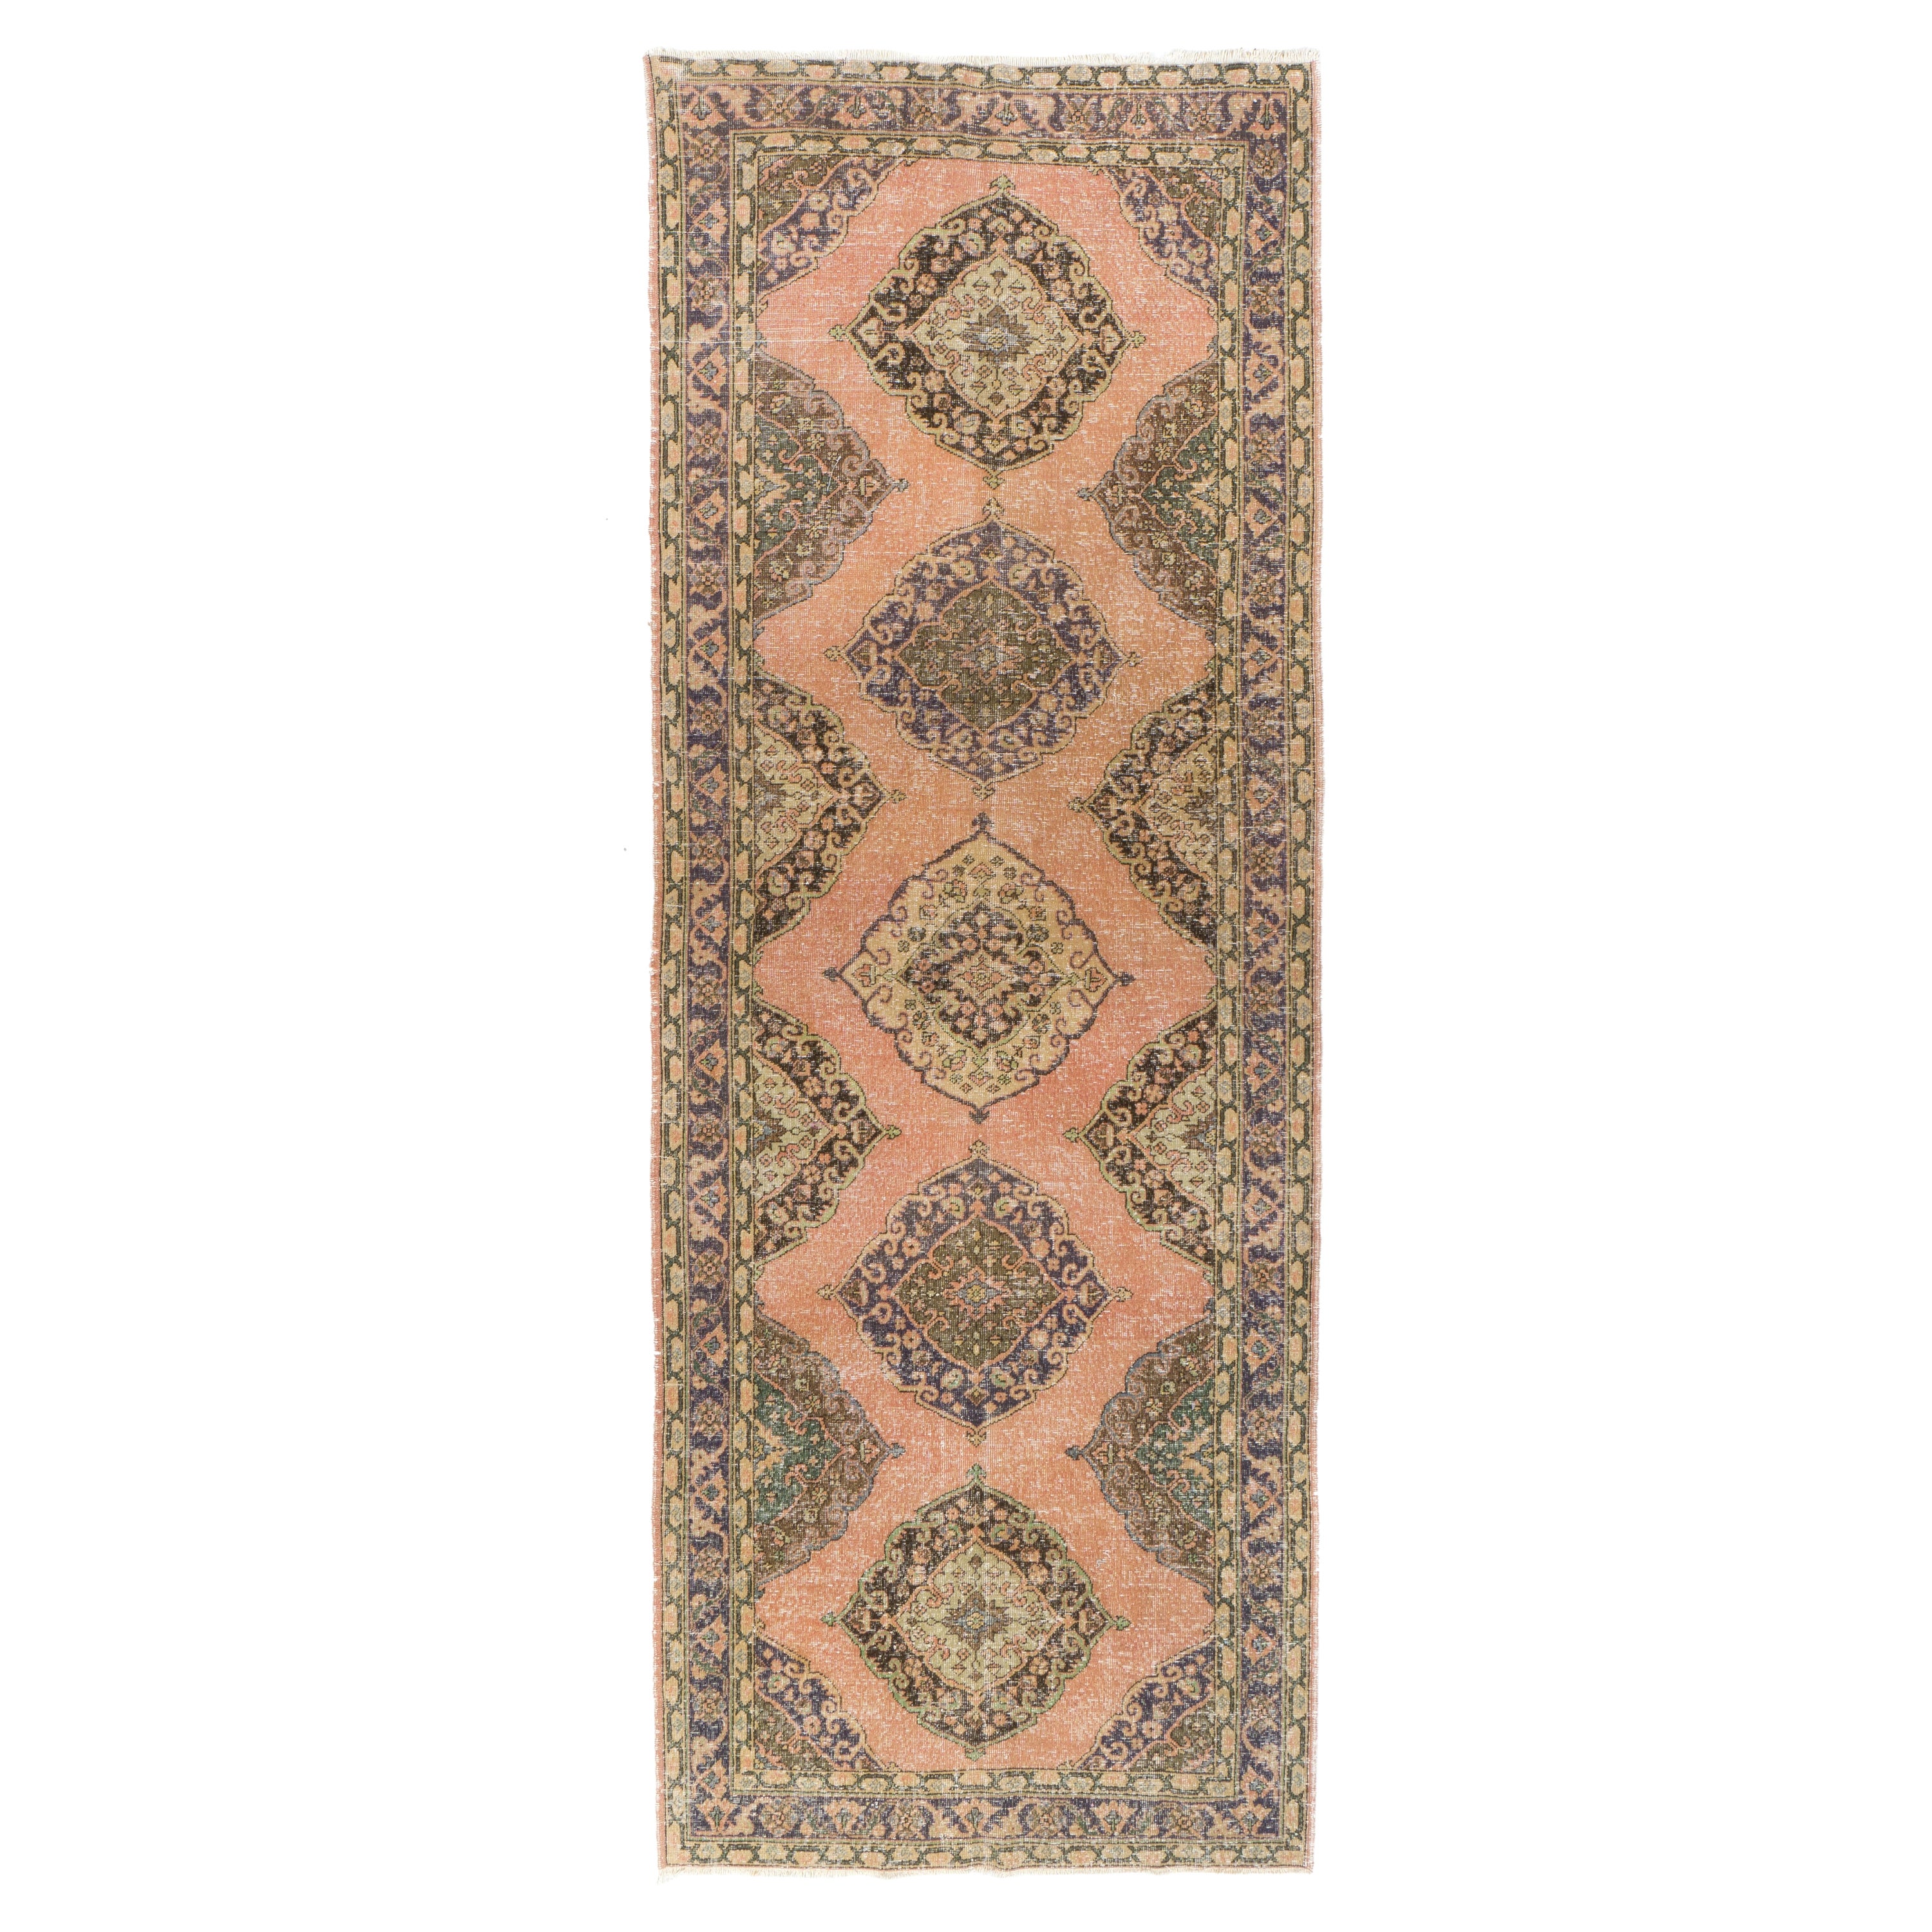 4.7x13.2 Ft Traditional Hand Knotted Runner Rug. Unique Vintage Corridor Carpet For Sale